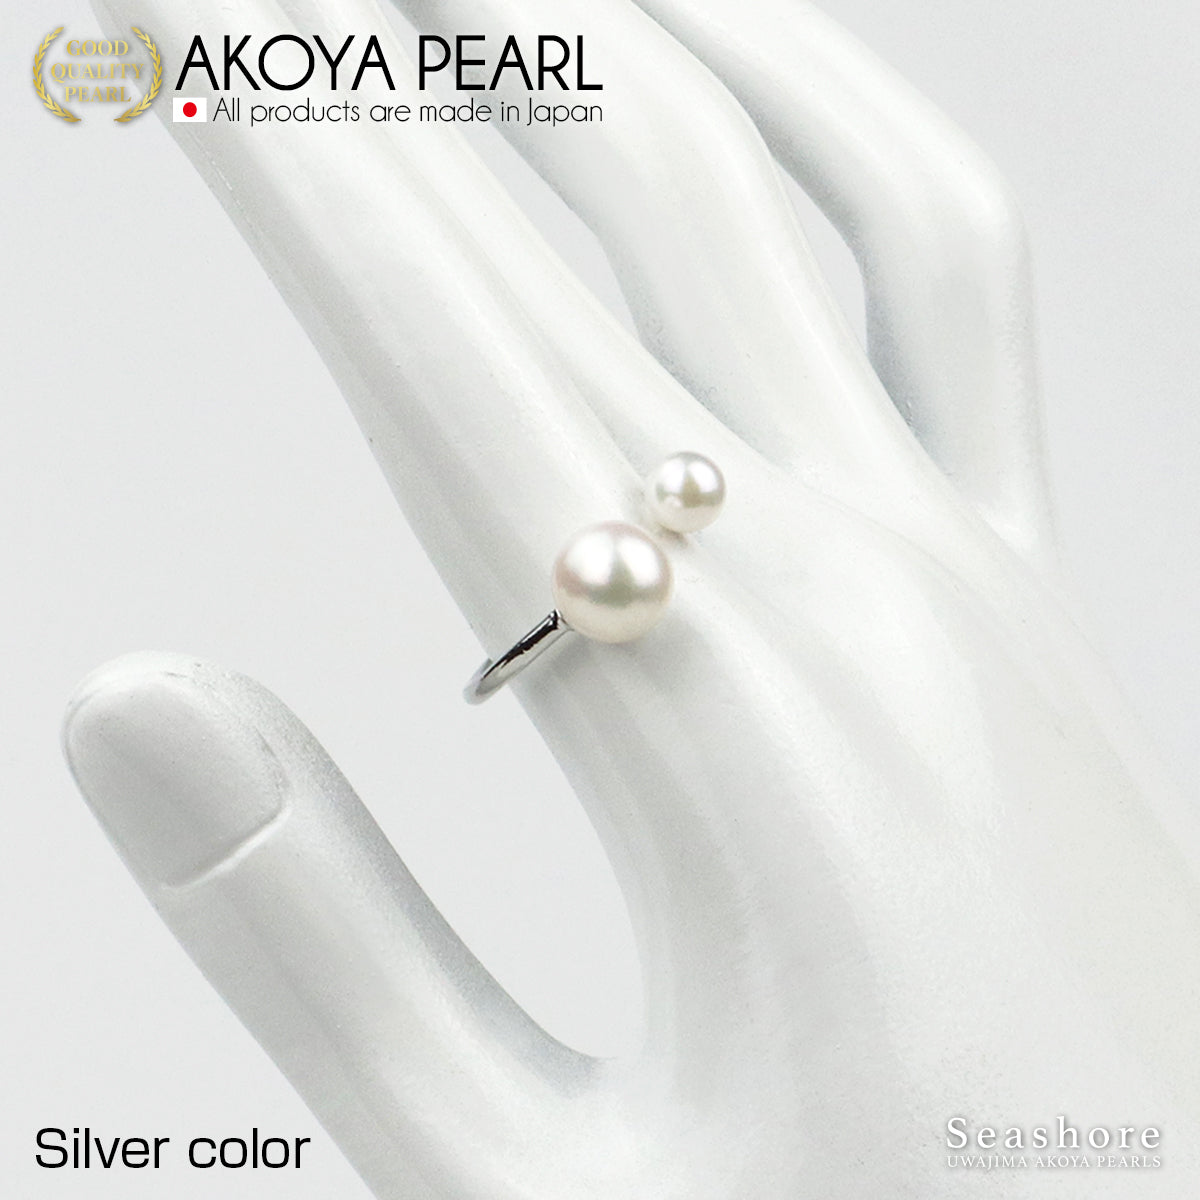 2 bead pearl ring 3 colors brass rhodium/pink gold/gold 5.0-8.5mm Akoya pearl folk ring free size